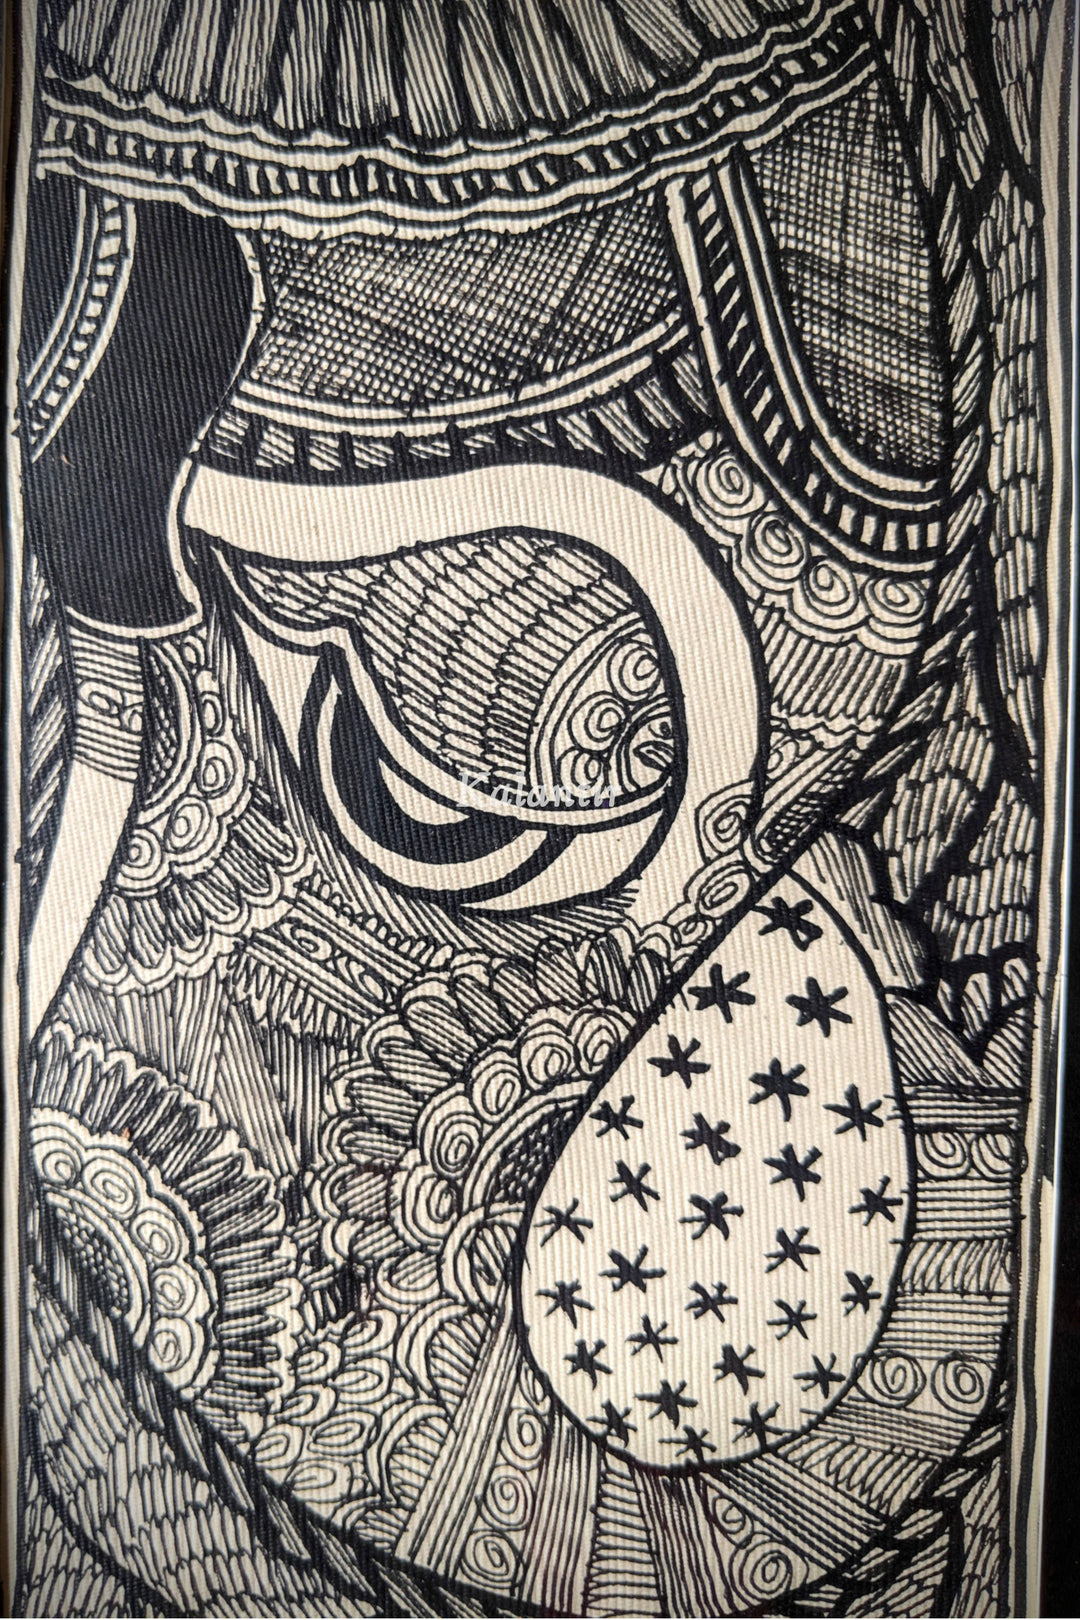 Closer view showing traditional Madhubani motifs on Lord Ganesha's forehead and trunk.